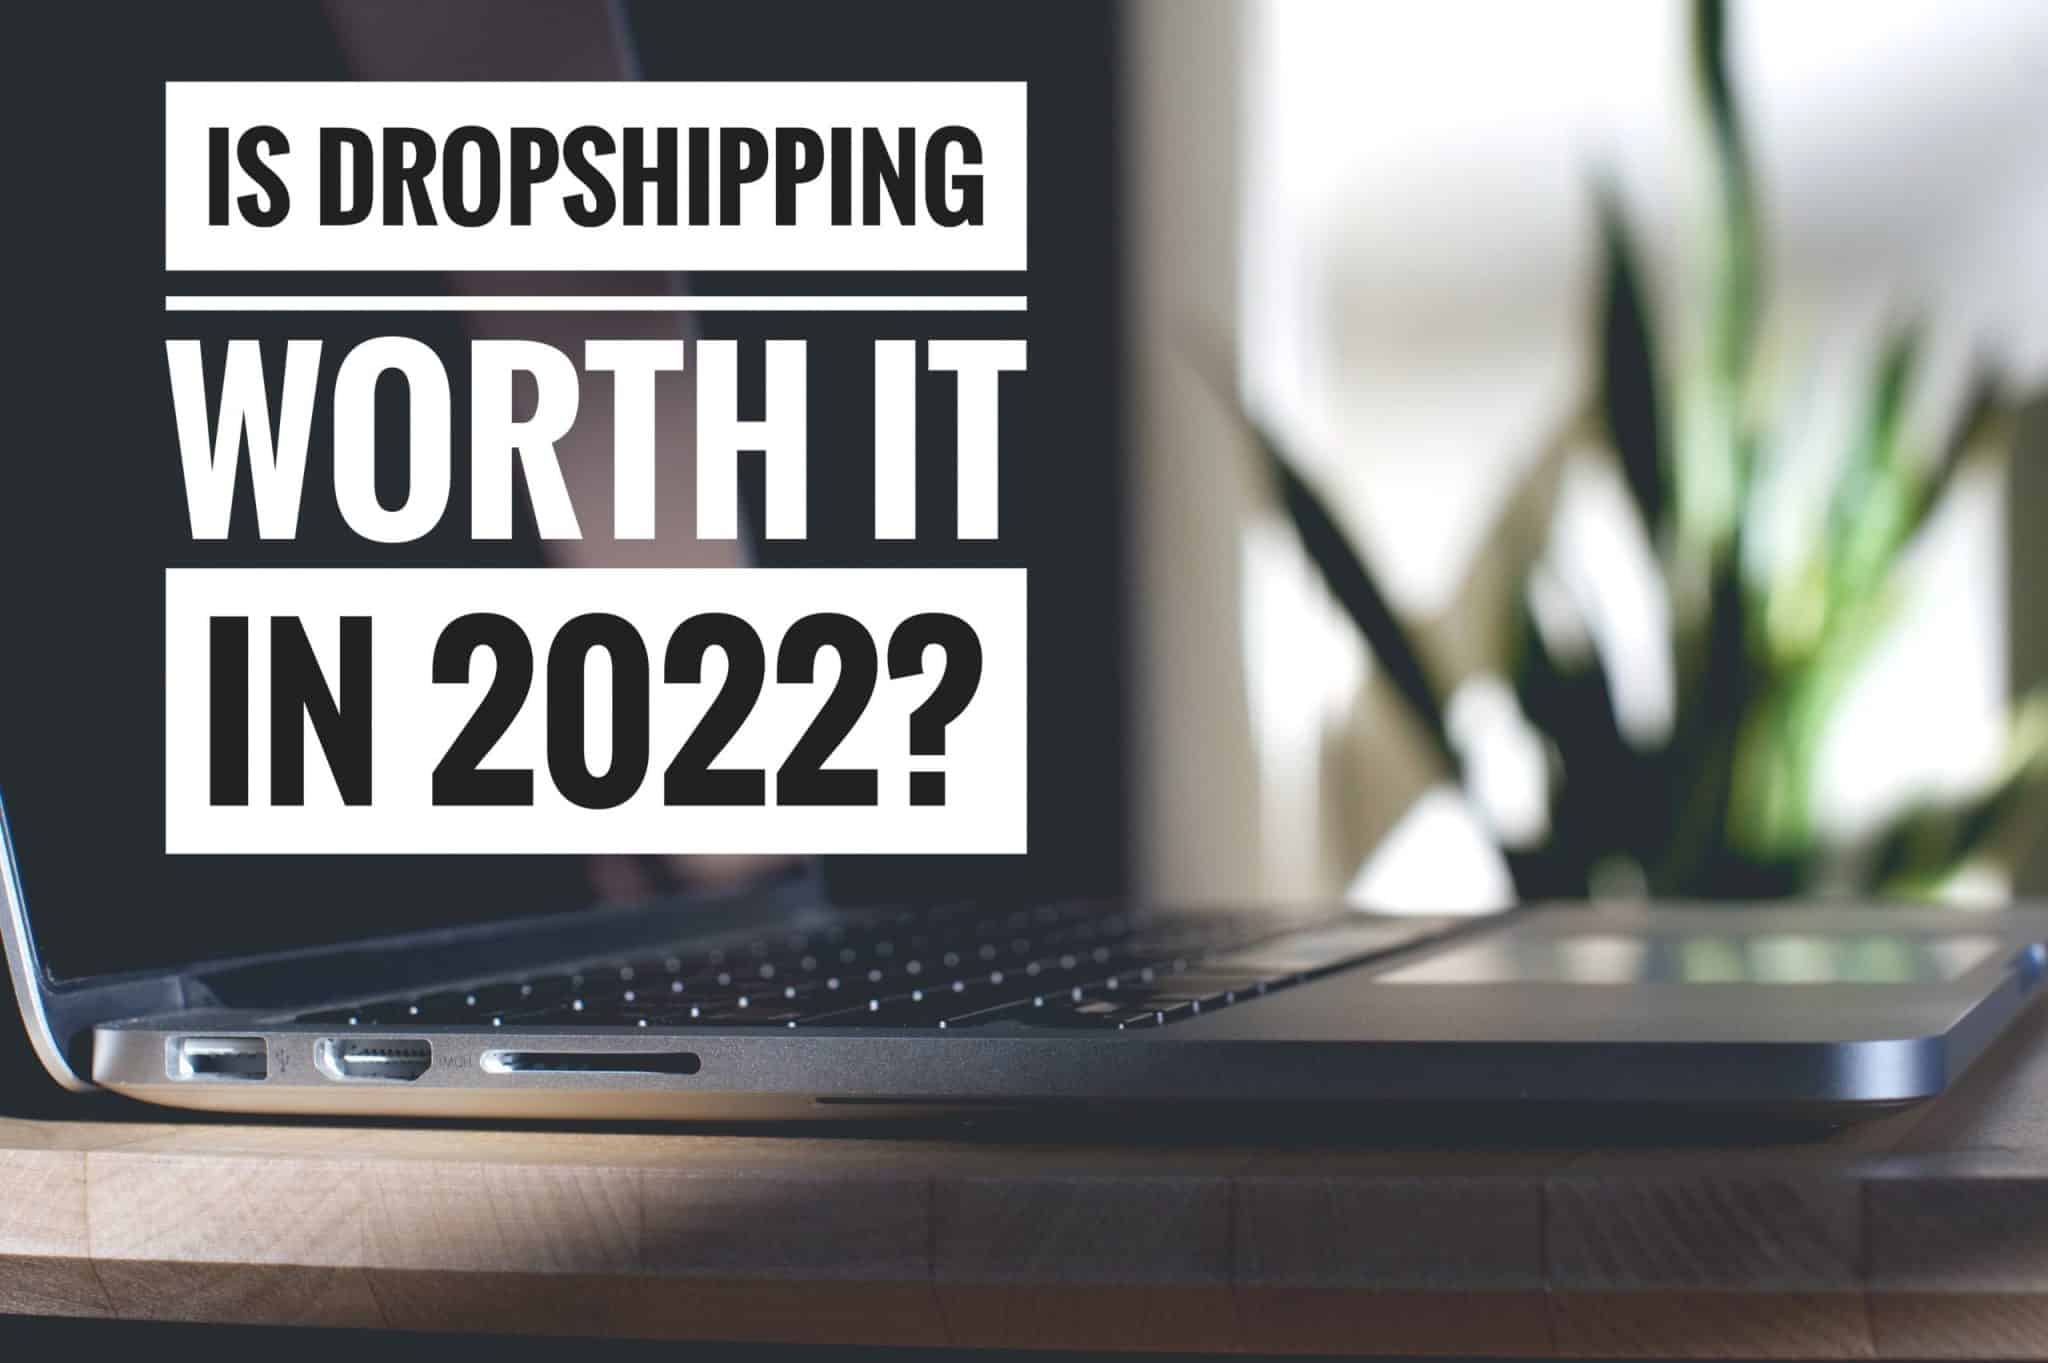 Is Dropshipping Worth It In 2022?